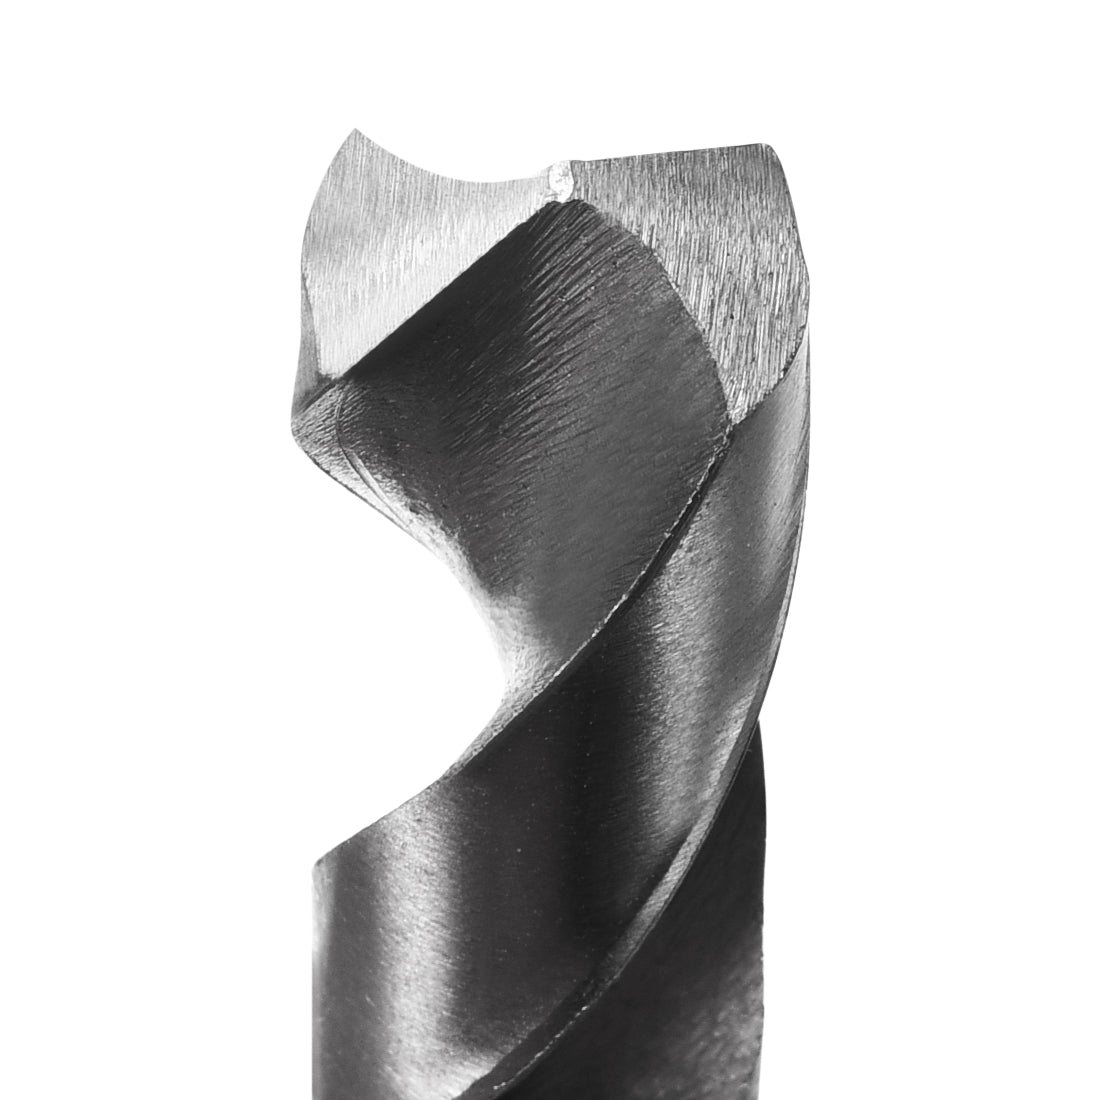 uxcell Uxcell 21.5mm Reduced Shank Drill Bit High Speed Steel 4241 with 1/2" Straight Shank